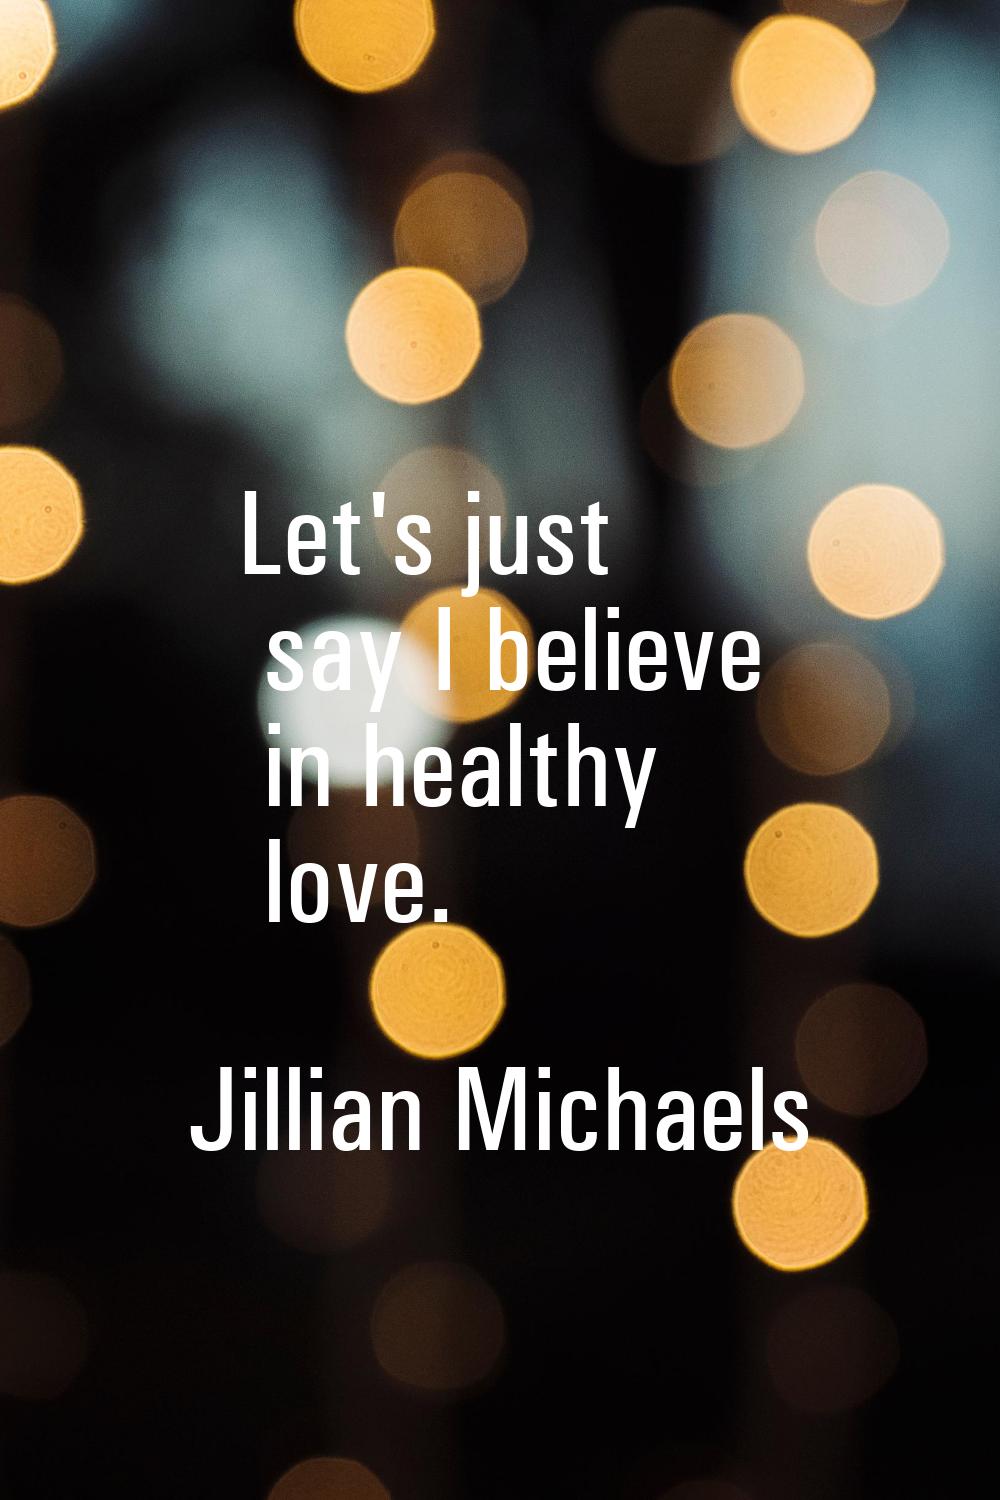 Let's just say I believe in healthy love.